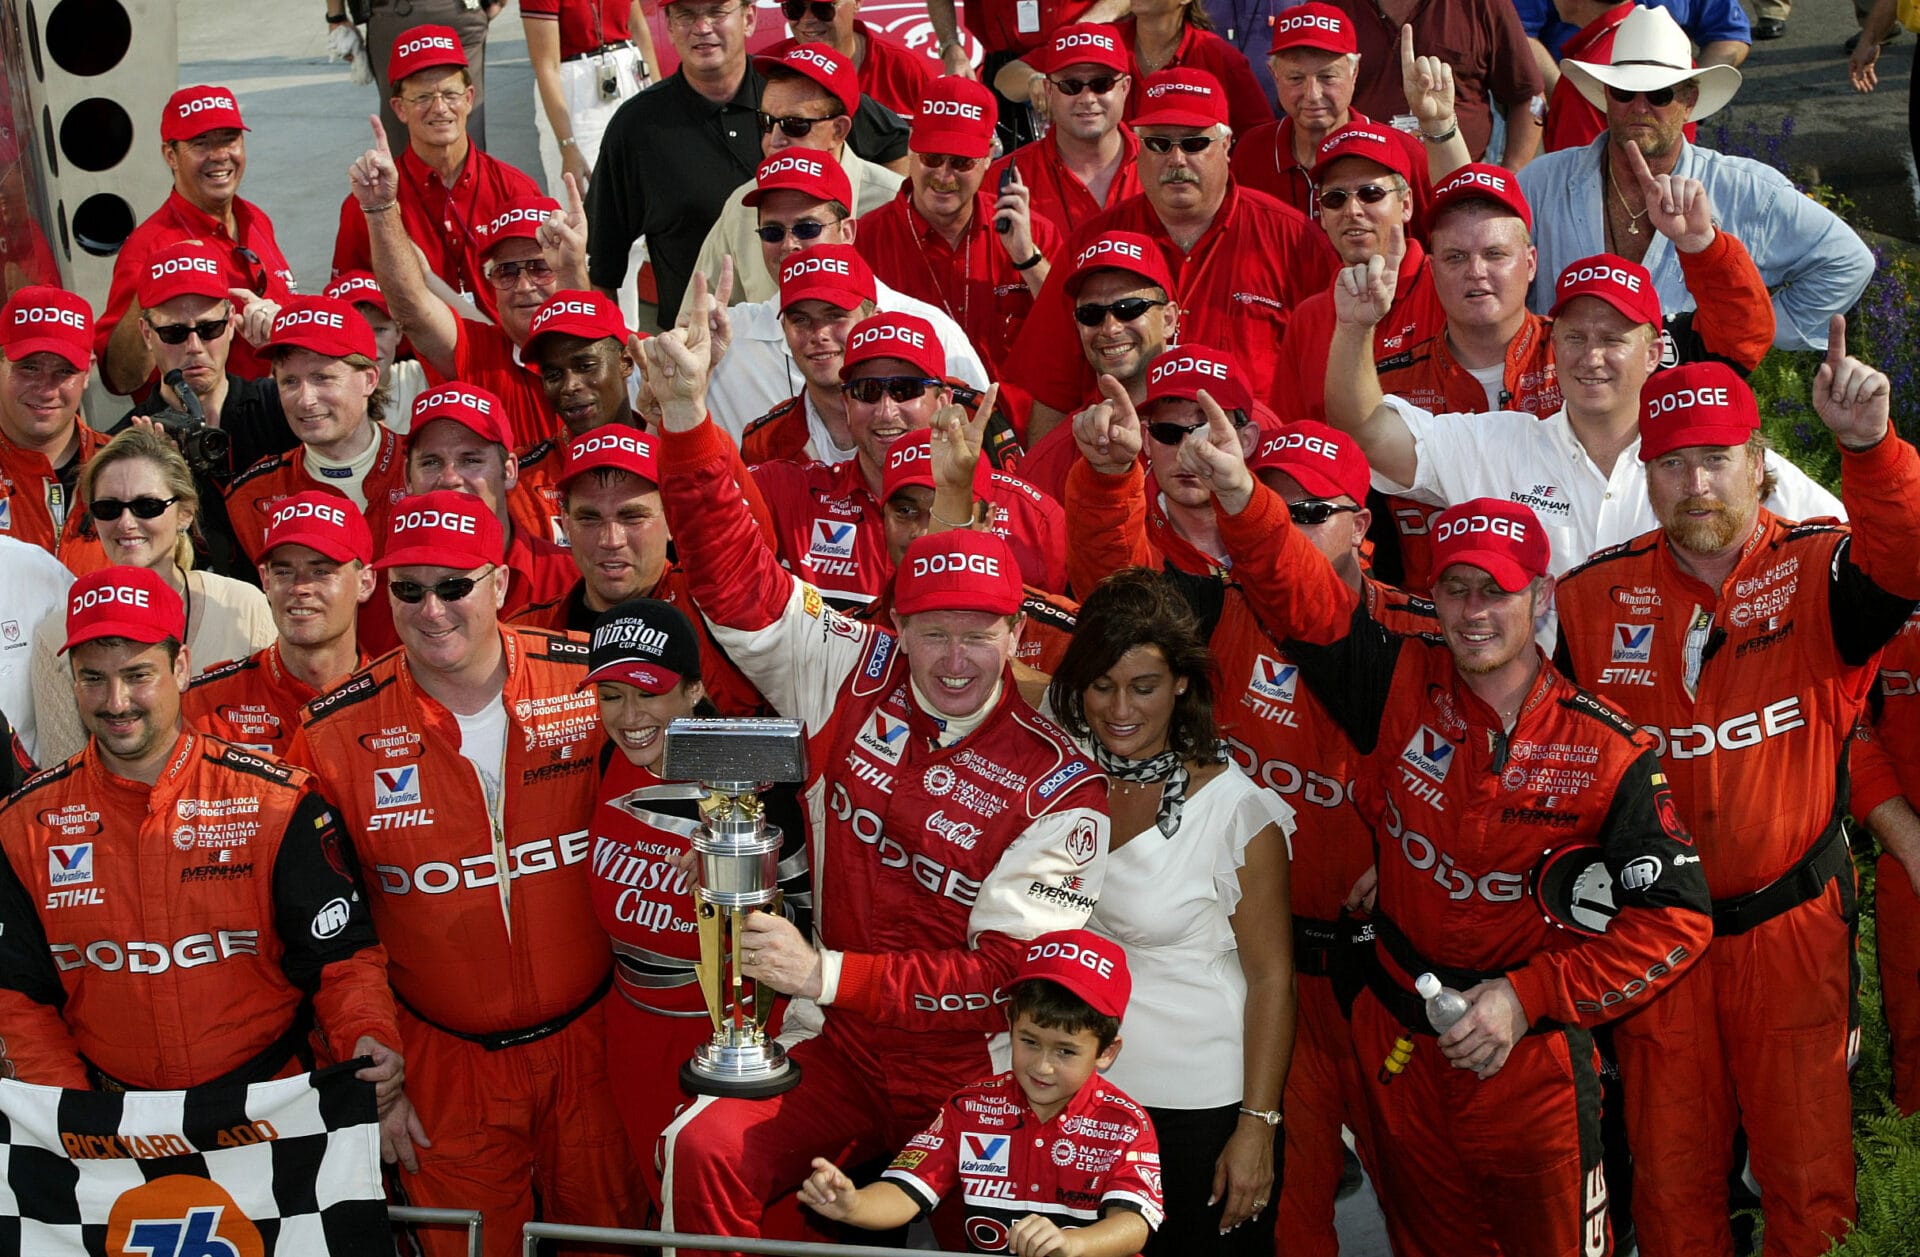 Bill Elliott celebrates with is #9 Evernham Motorsports Dodge teammates on August 4, 2002 after winning the Brickyard 400 at Indianapolis Motor Speedway. His son, pictured front row center, would go on to win the 2020 Cup Series championship.(Photo by Jonathan Ferrey/Getty Images)